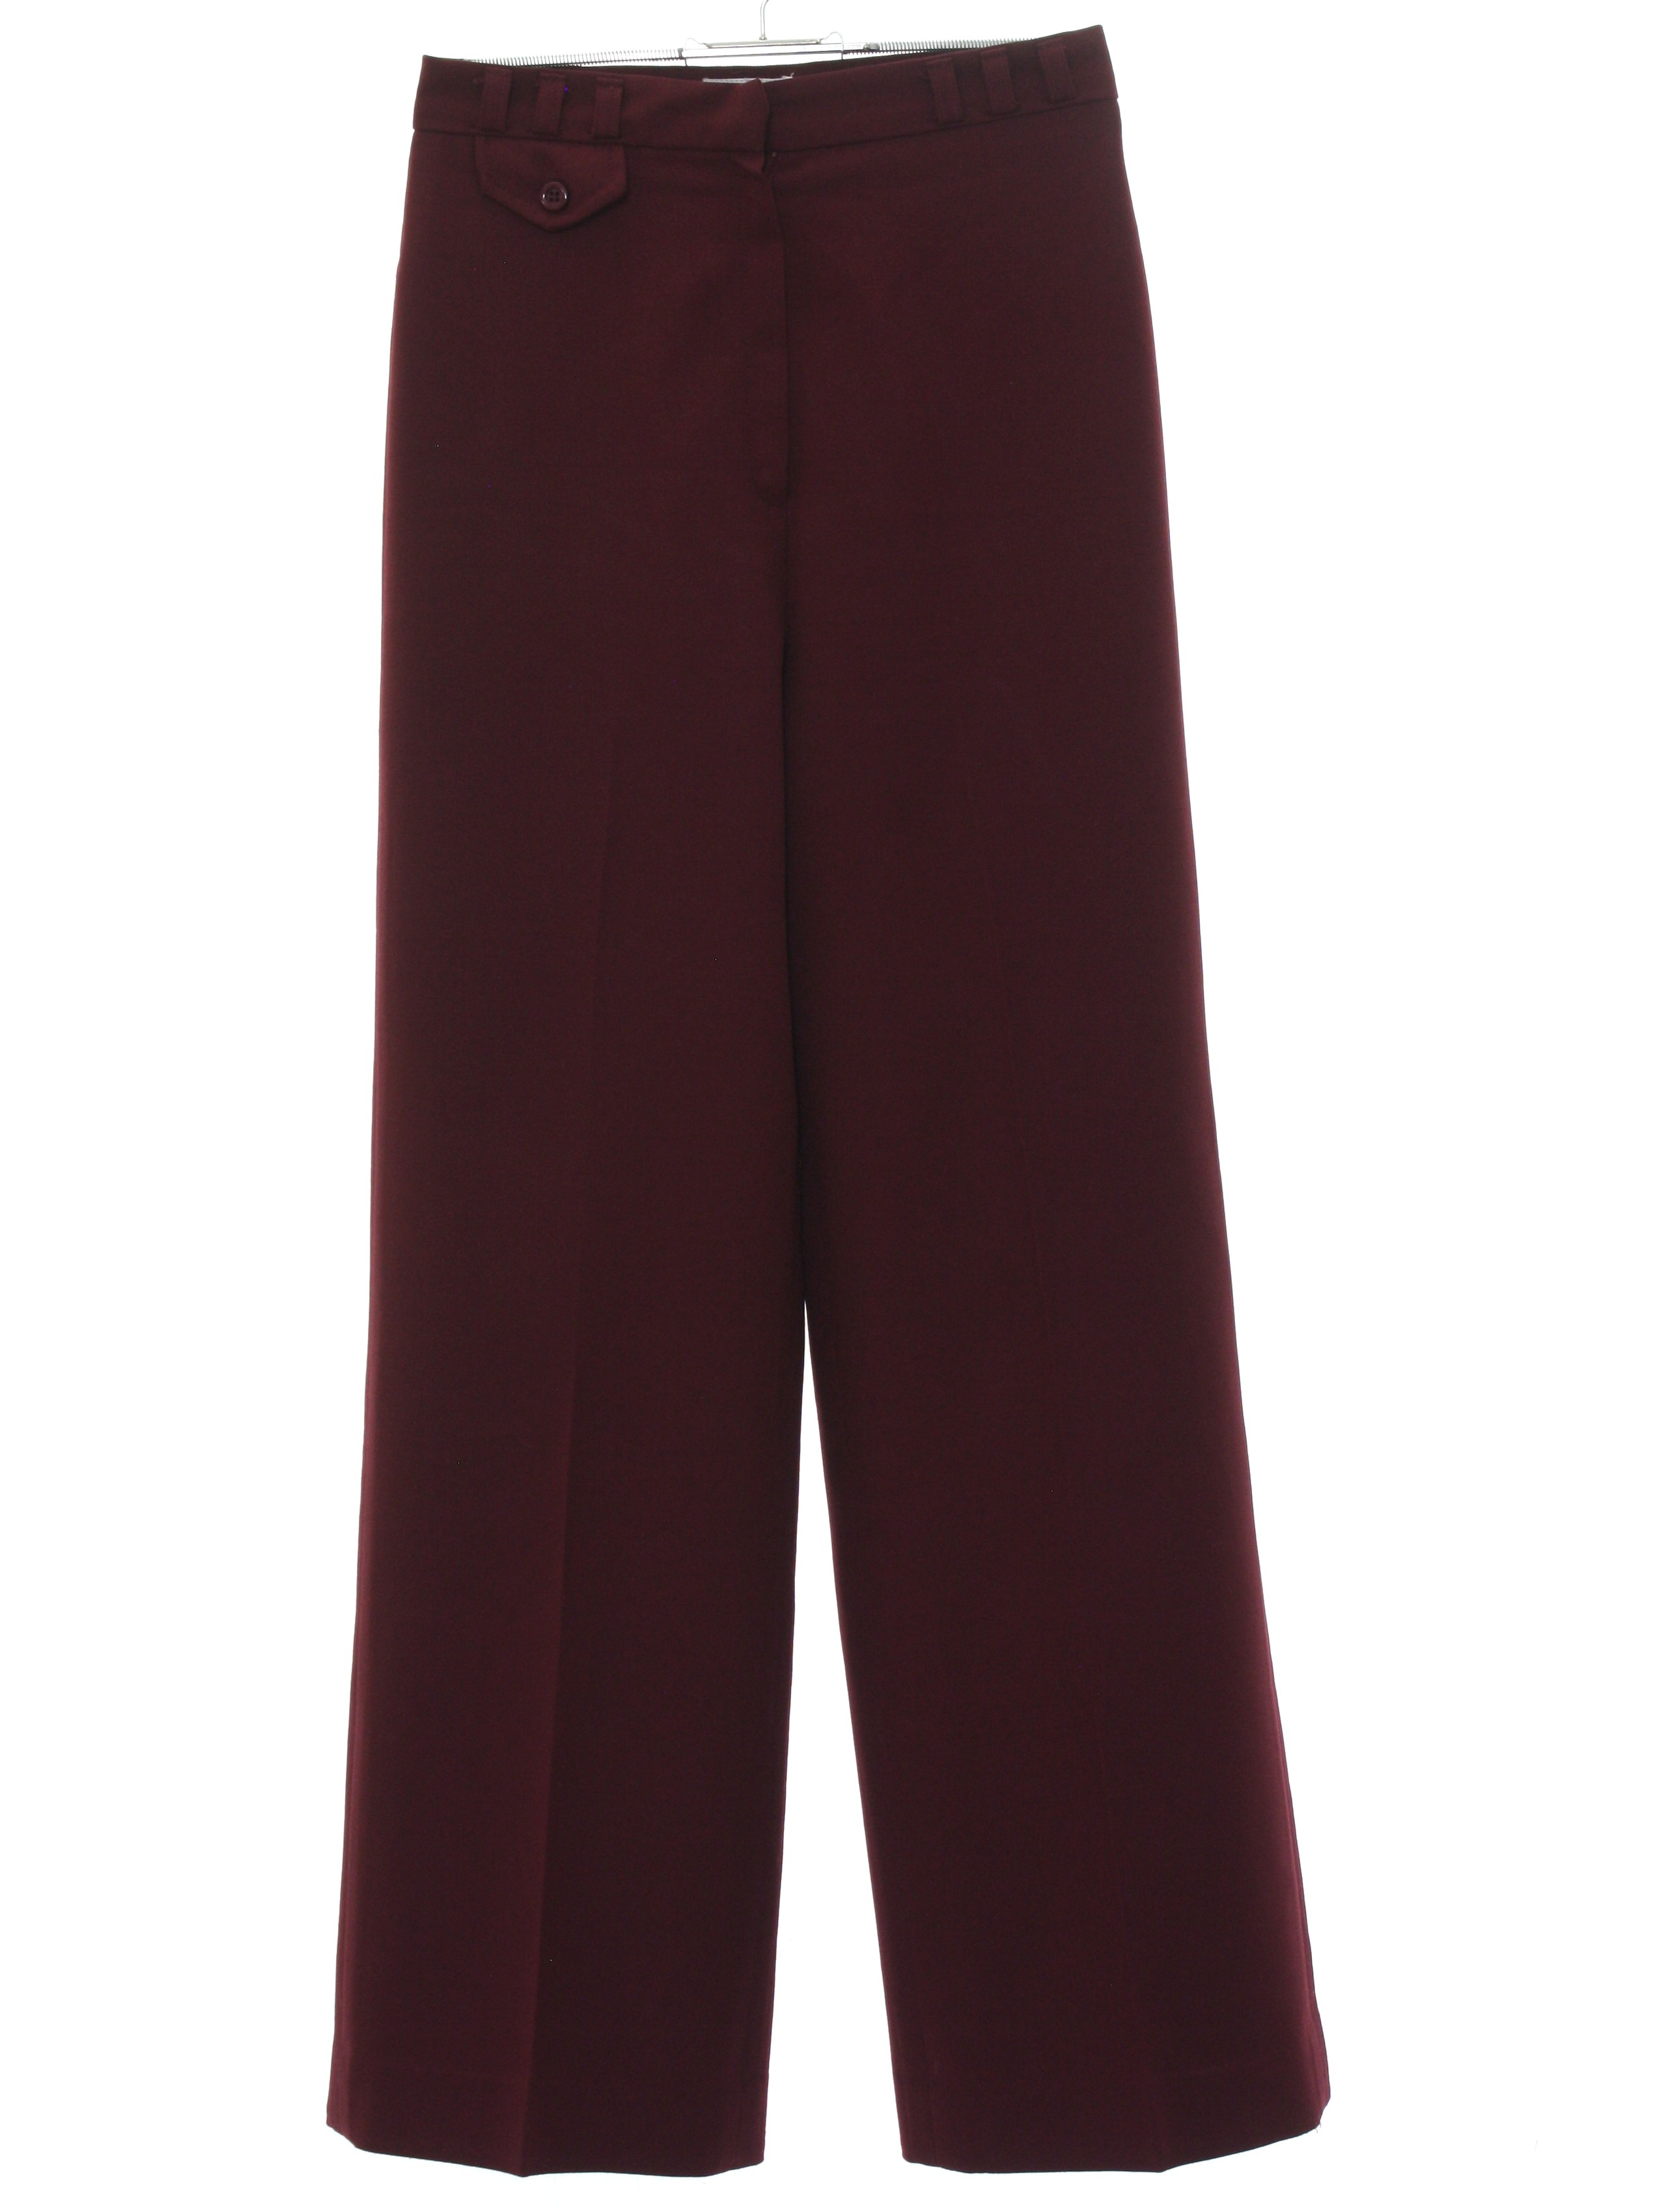 Eighties College Flared Pants / Flares: Early 80s -College- Womens ...